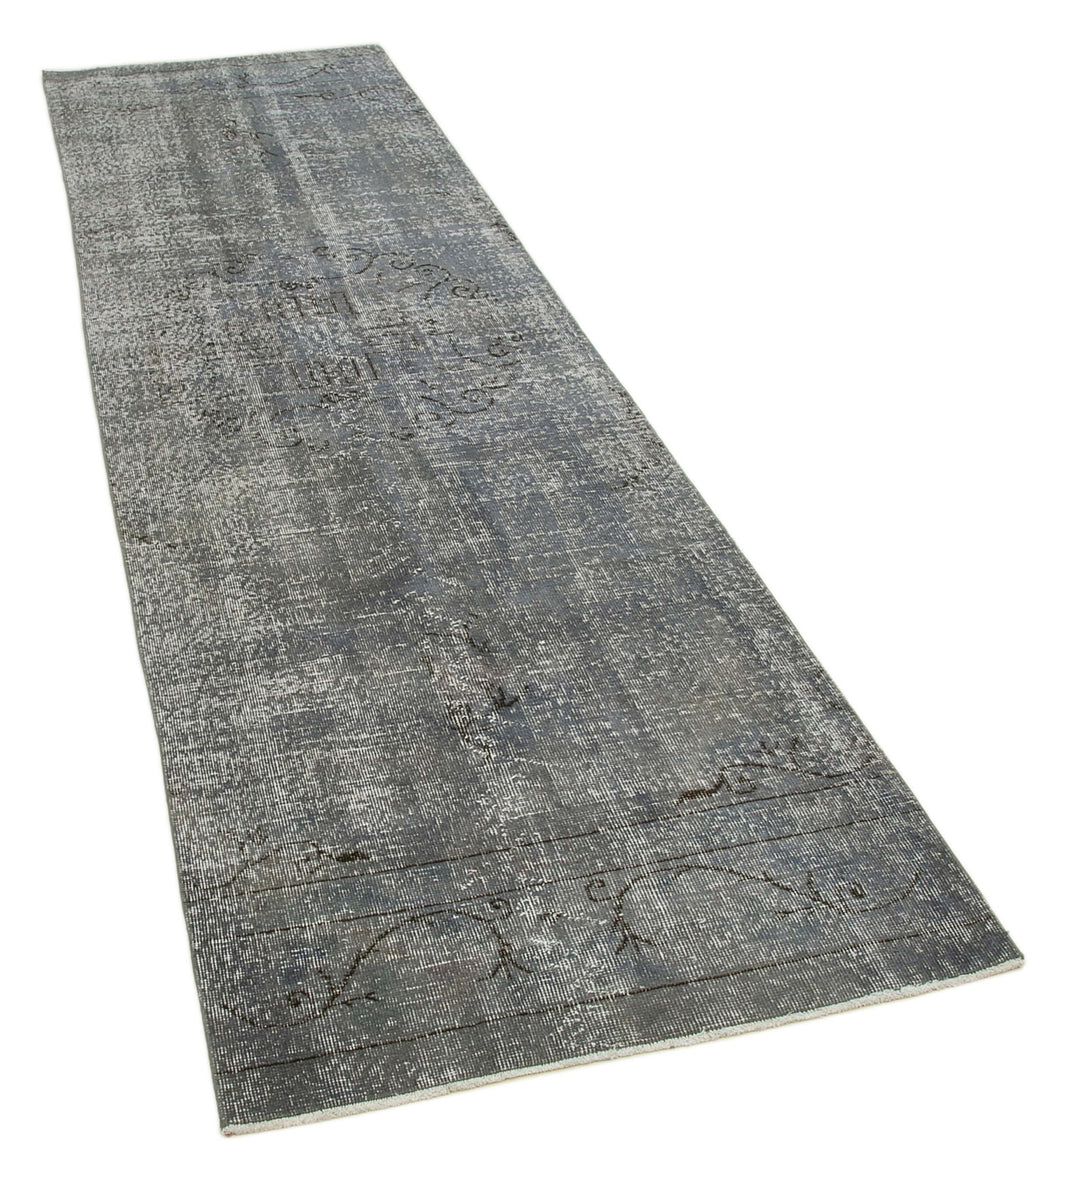 Handmade Overdyed Runner > Design# OL-AC-28655 > Size: 2'-11" x 10'-3", Carpet Culture Rugs, Handmade Rugs, NYC Rugs, New Rugs, Shop Rugs, Rug Store, Outlet Rugs, SoHo Rugs, Rugs in USA